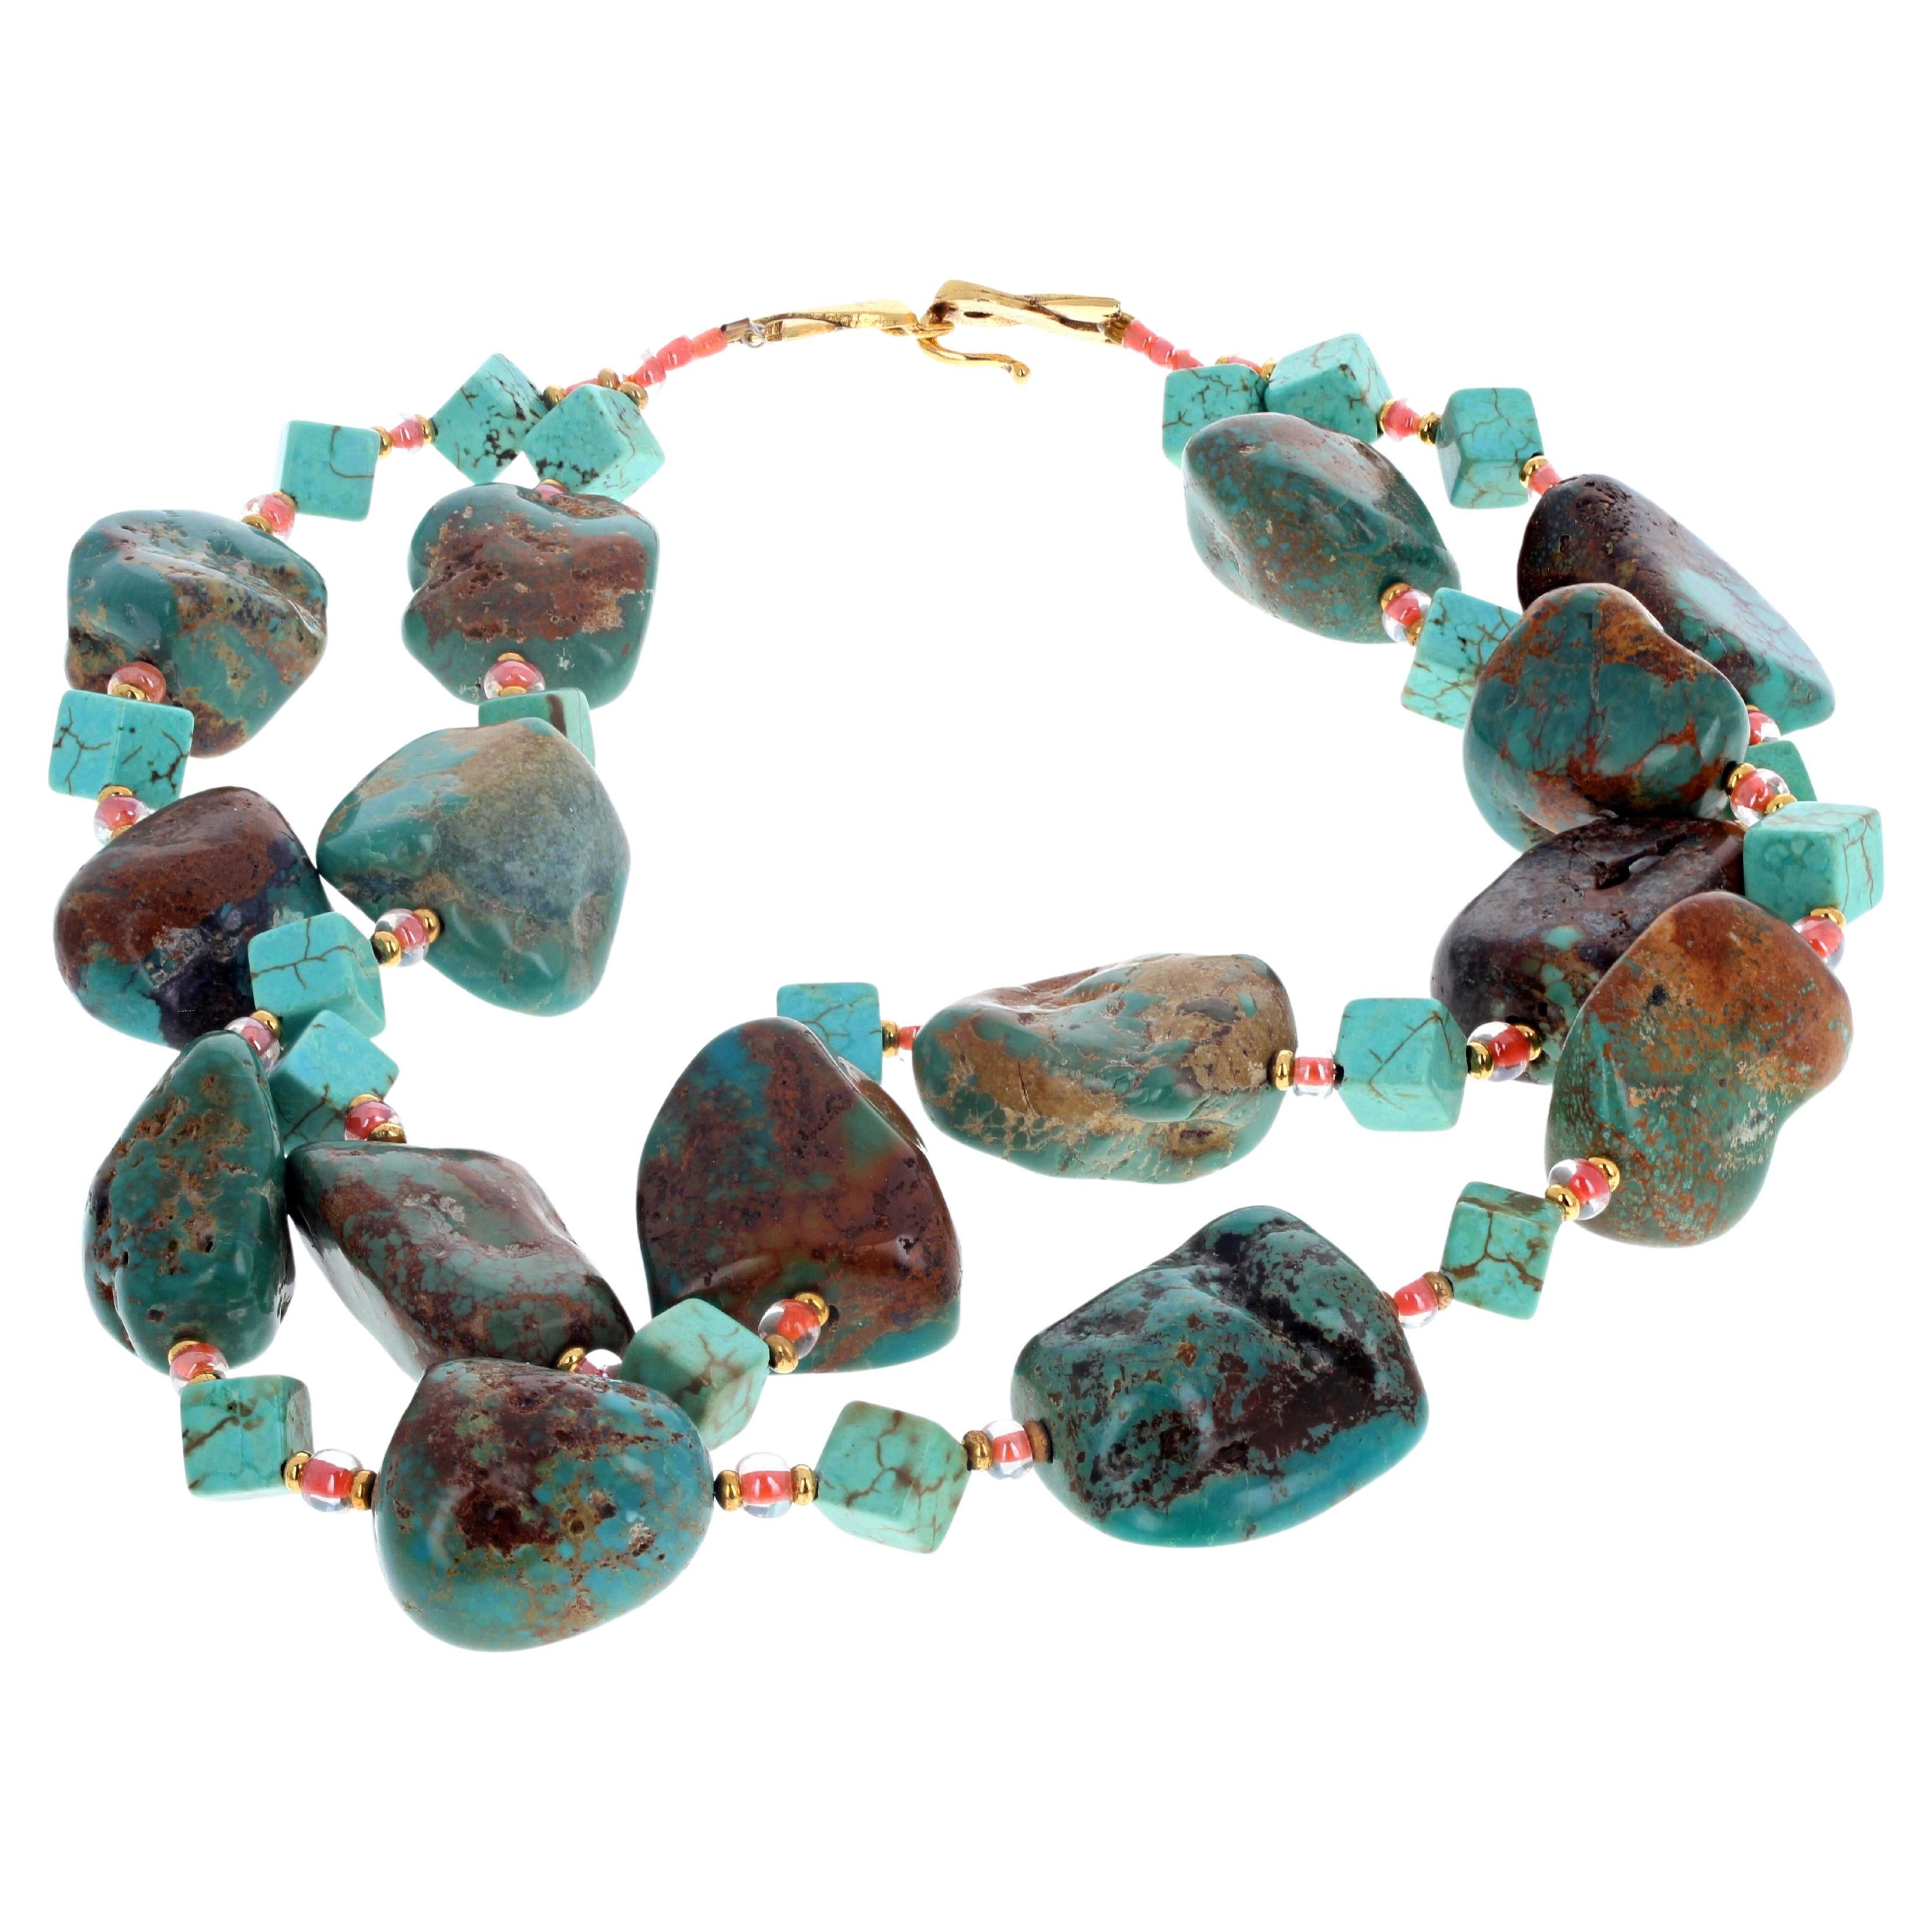 Amazing highly polished natural Chinese Turquoise in this beautiful double strand 17 inches long necklace.  The smaller cubic gemstones are also blue Turquoise.  The largest Turquoise is approximately 26mm x 22mm and although each one is a different